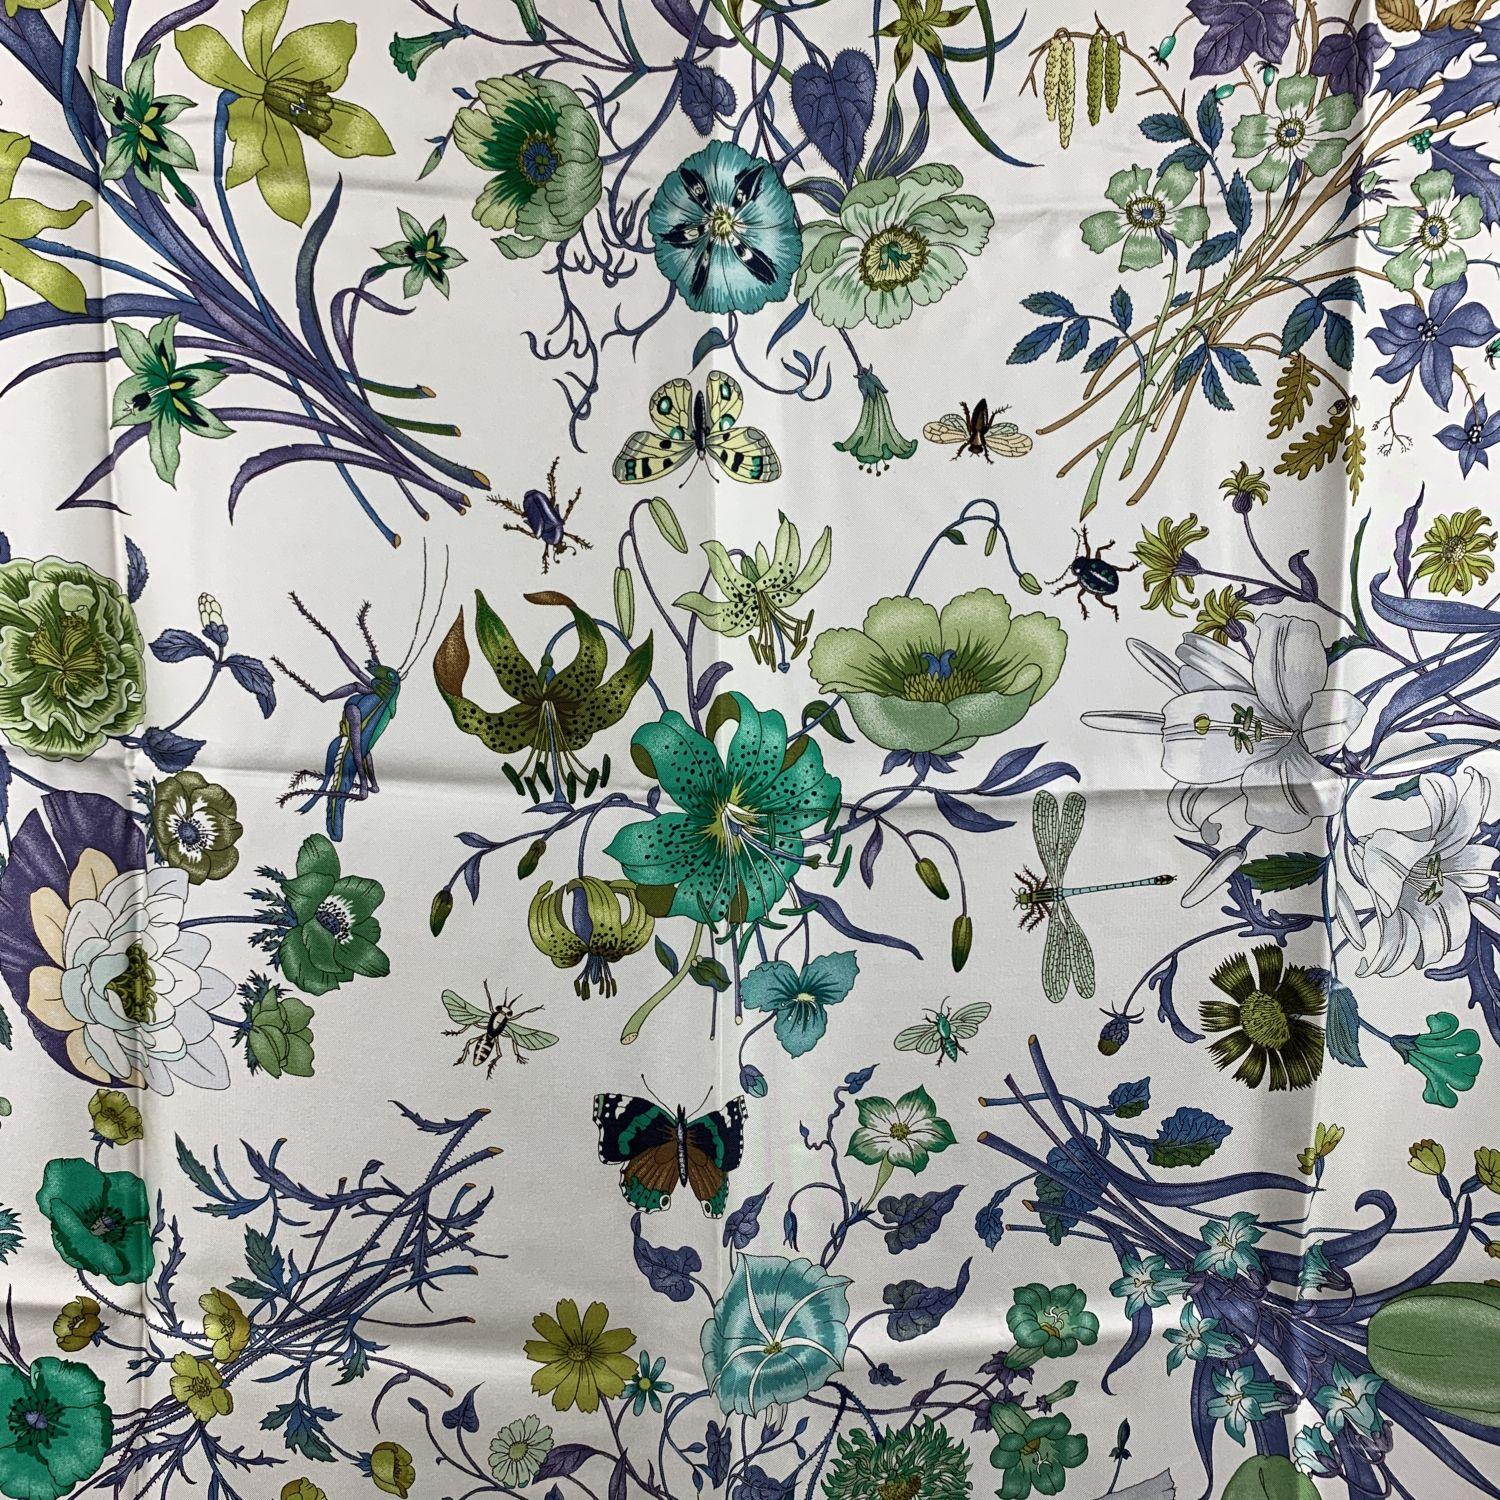 The Flora silk scarf born in 1966 by the artist Vittorio Accornero. He was the textile designer for Gucci between the 1960s and 1981. The Flora design is a magical and delicate composition of flowers, berries and insects depicted with the precision